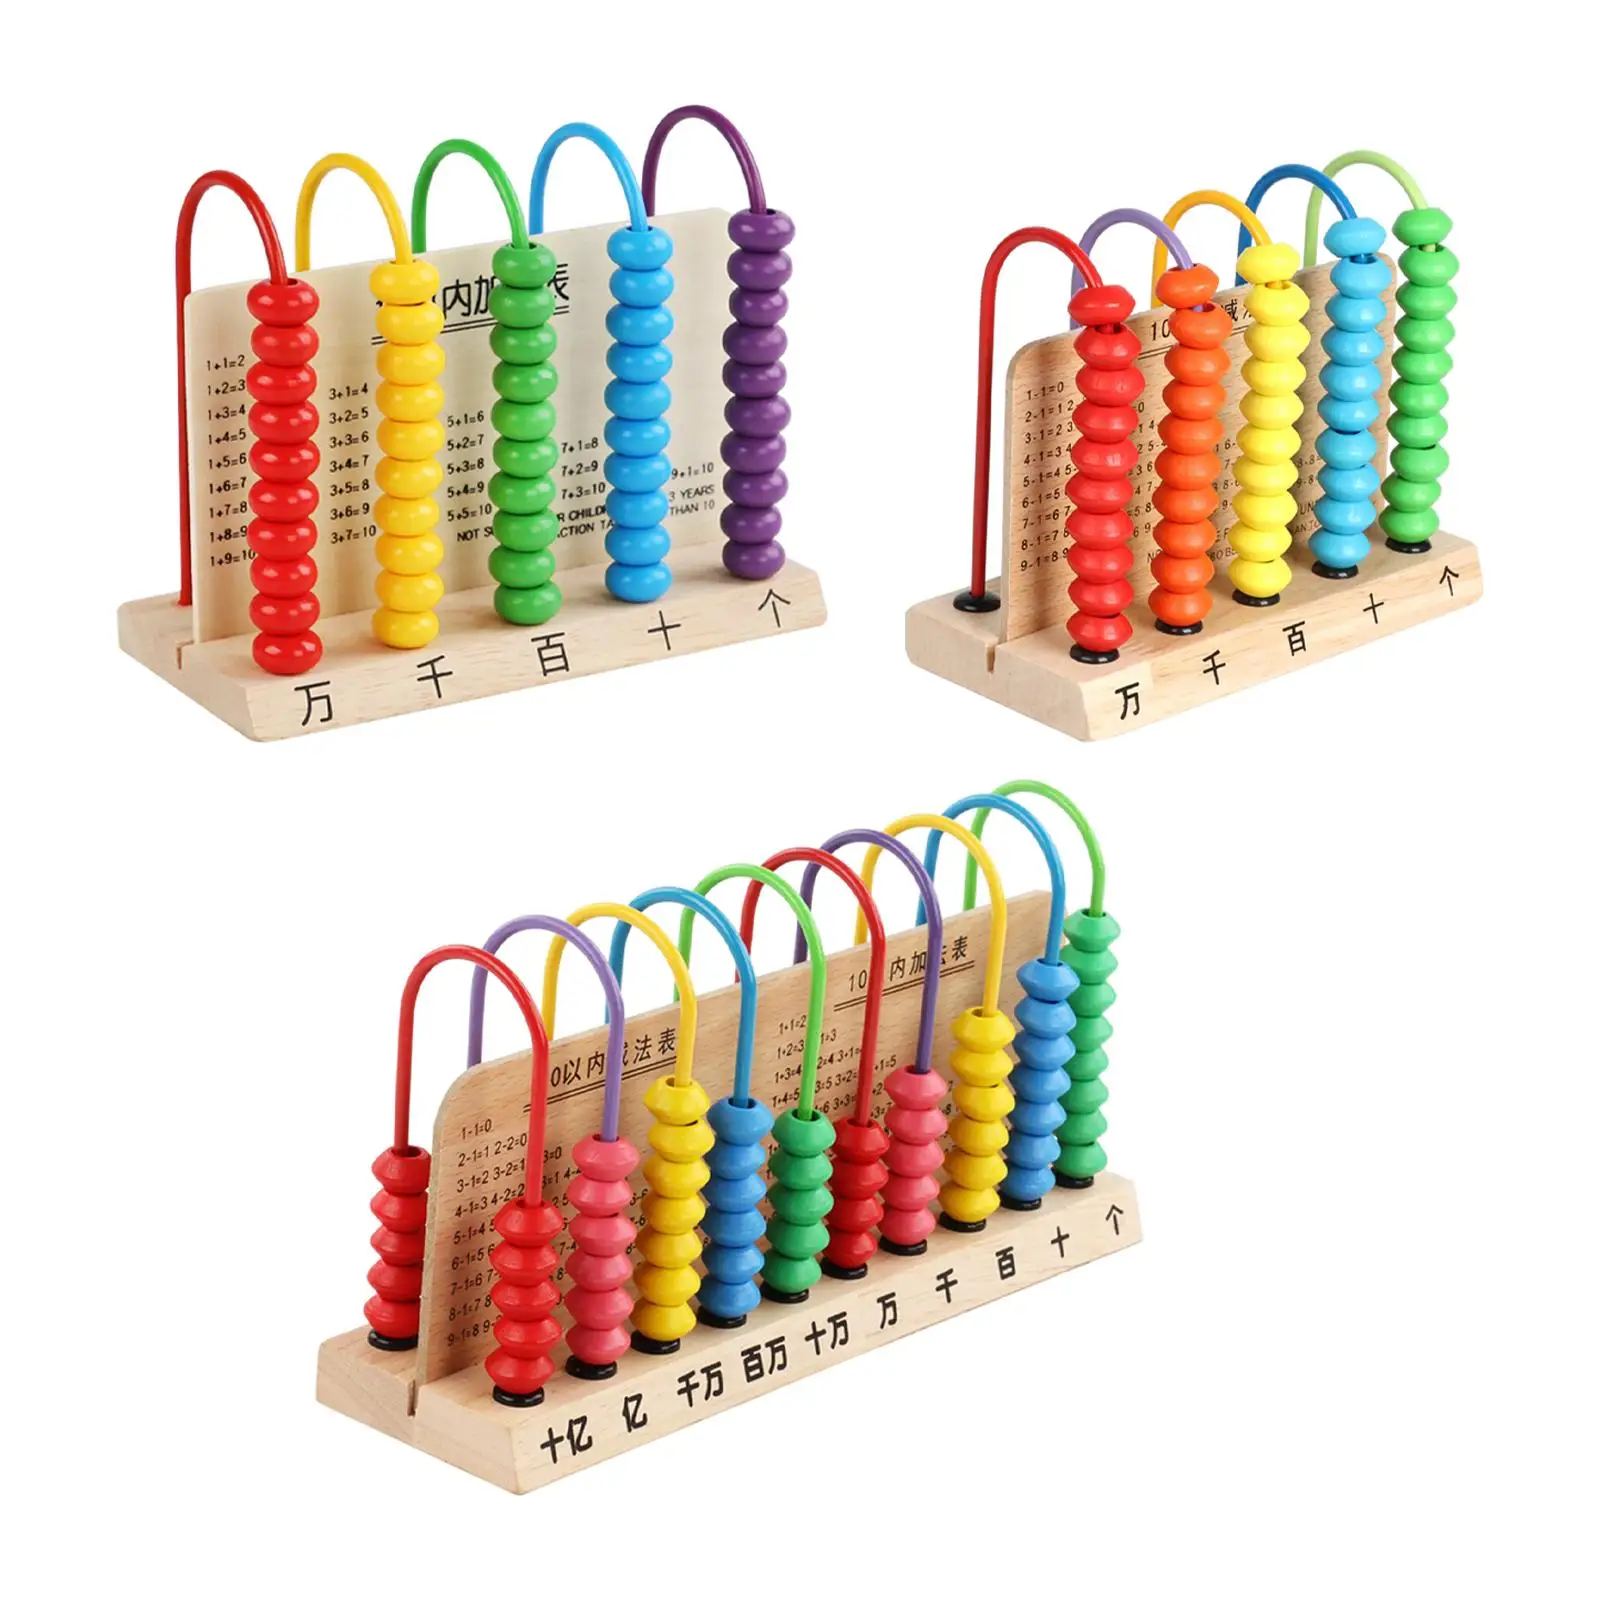 Classic Wooden Educational Counting Toy Wooden for Preschool Kids Toddlers